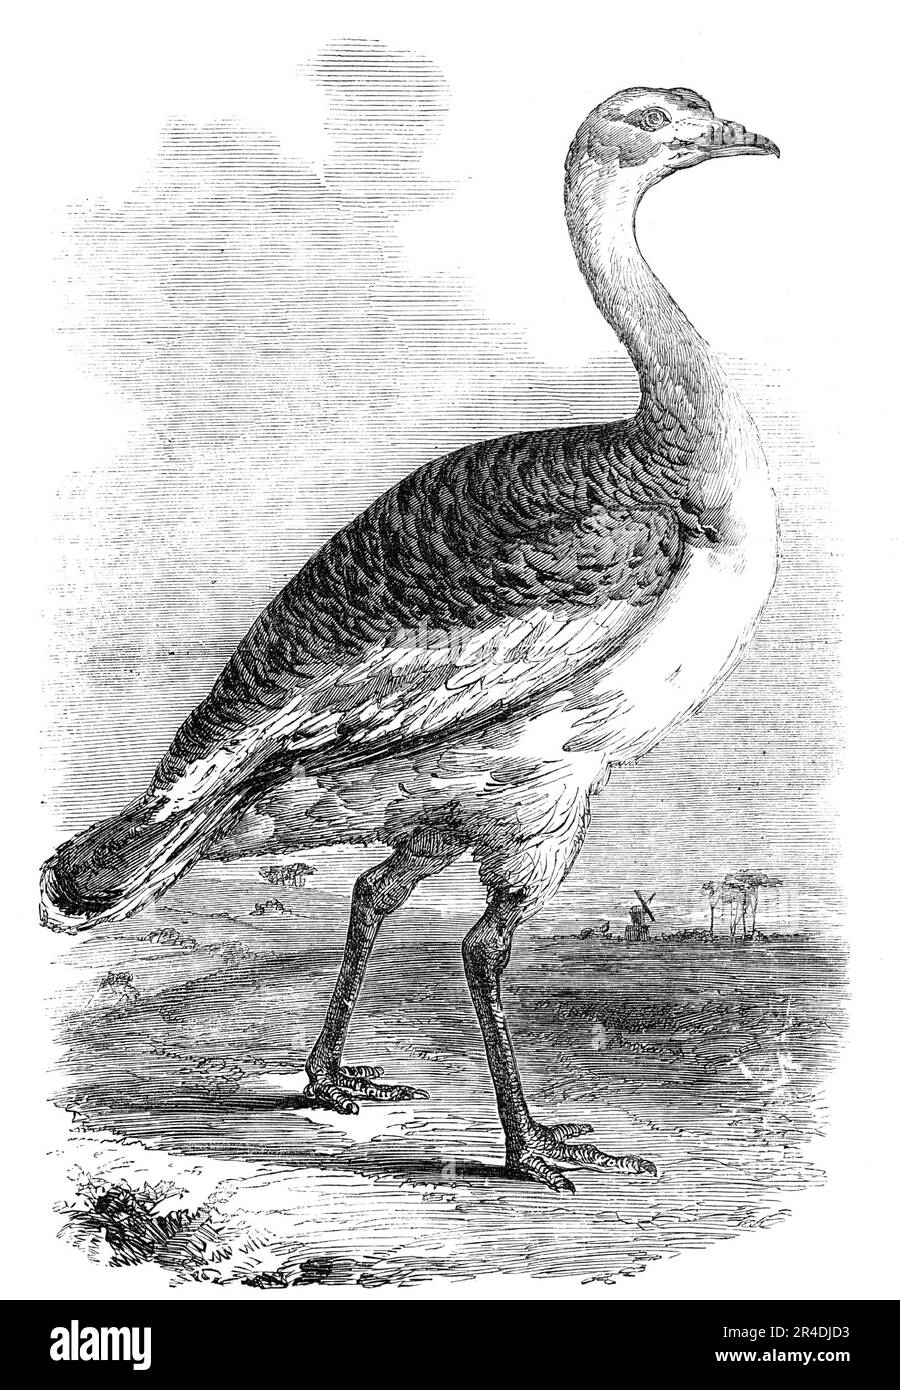 Male Bustard taken near Hungerford, Berks., 1856. 'A very valuable specimen of this almost extinct bird has been seen by the celebrated ornithologist, Mr. William Yarrell, and is by him represented to be a young male bird, of the third year. It is unquestionably the only male specimen of the Great Bustard which has been taken for some years in this country...when taken, [it] had its left leg broken just above the knee-joint; and although it &quot;showed fight&quot; at first, it was ultimately very easily taken on the ground by the little boy who found it...the boy...caught hold of the end of t Stock Photo